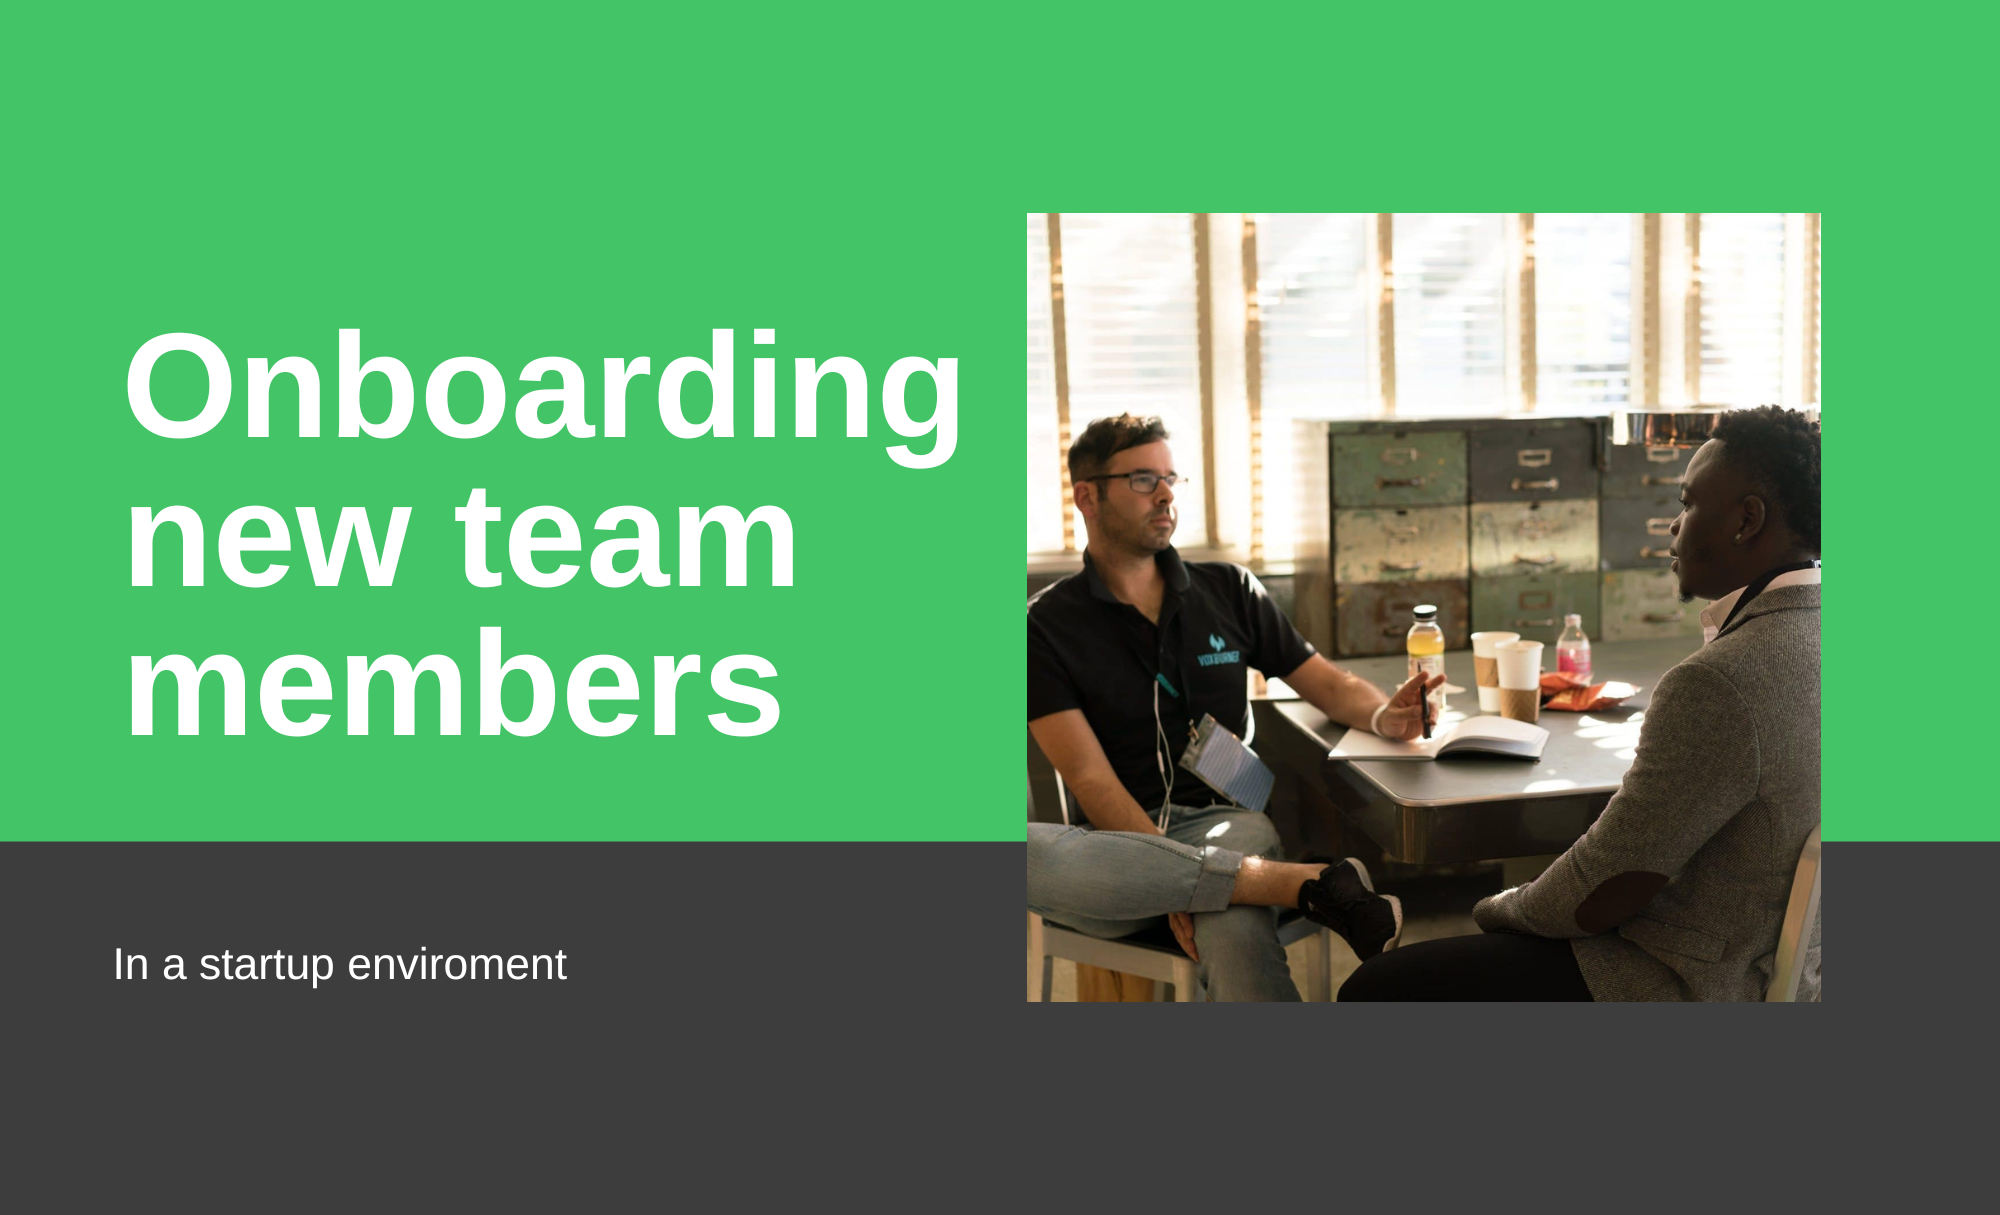 Onboarding new team members in a startup